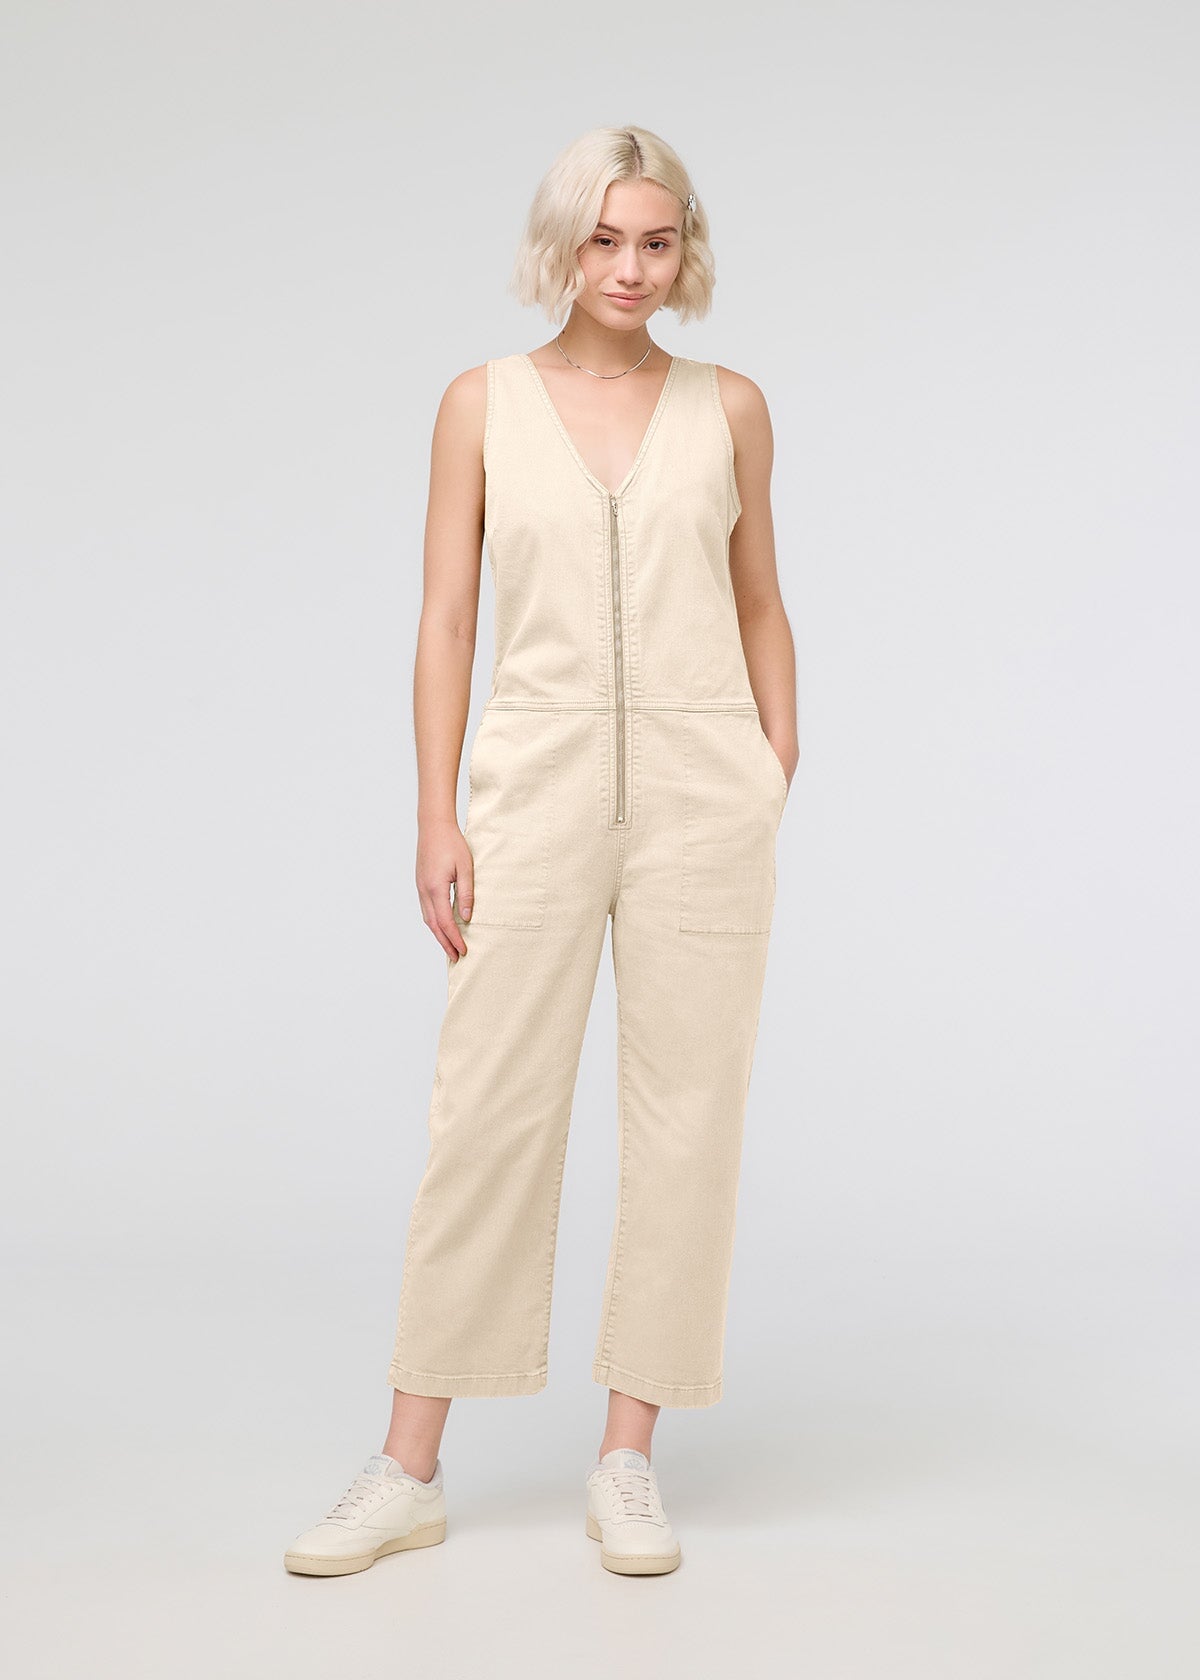 yardsong Rompers for Women Clearance of Sale Linen Pants for Women